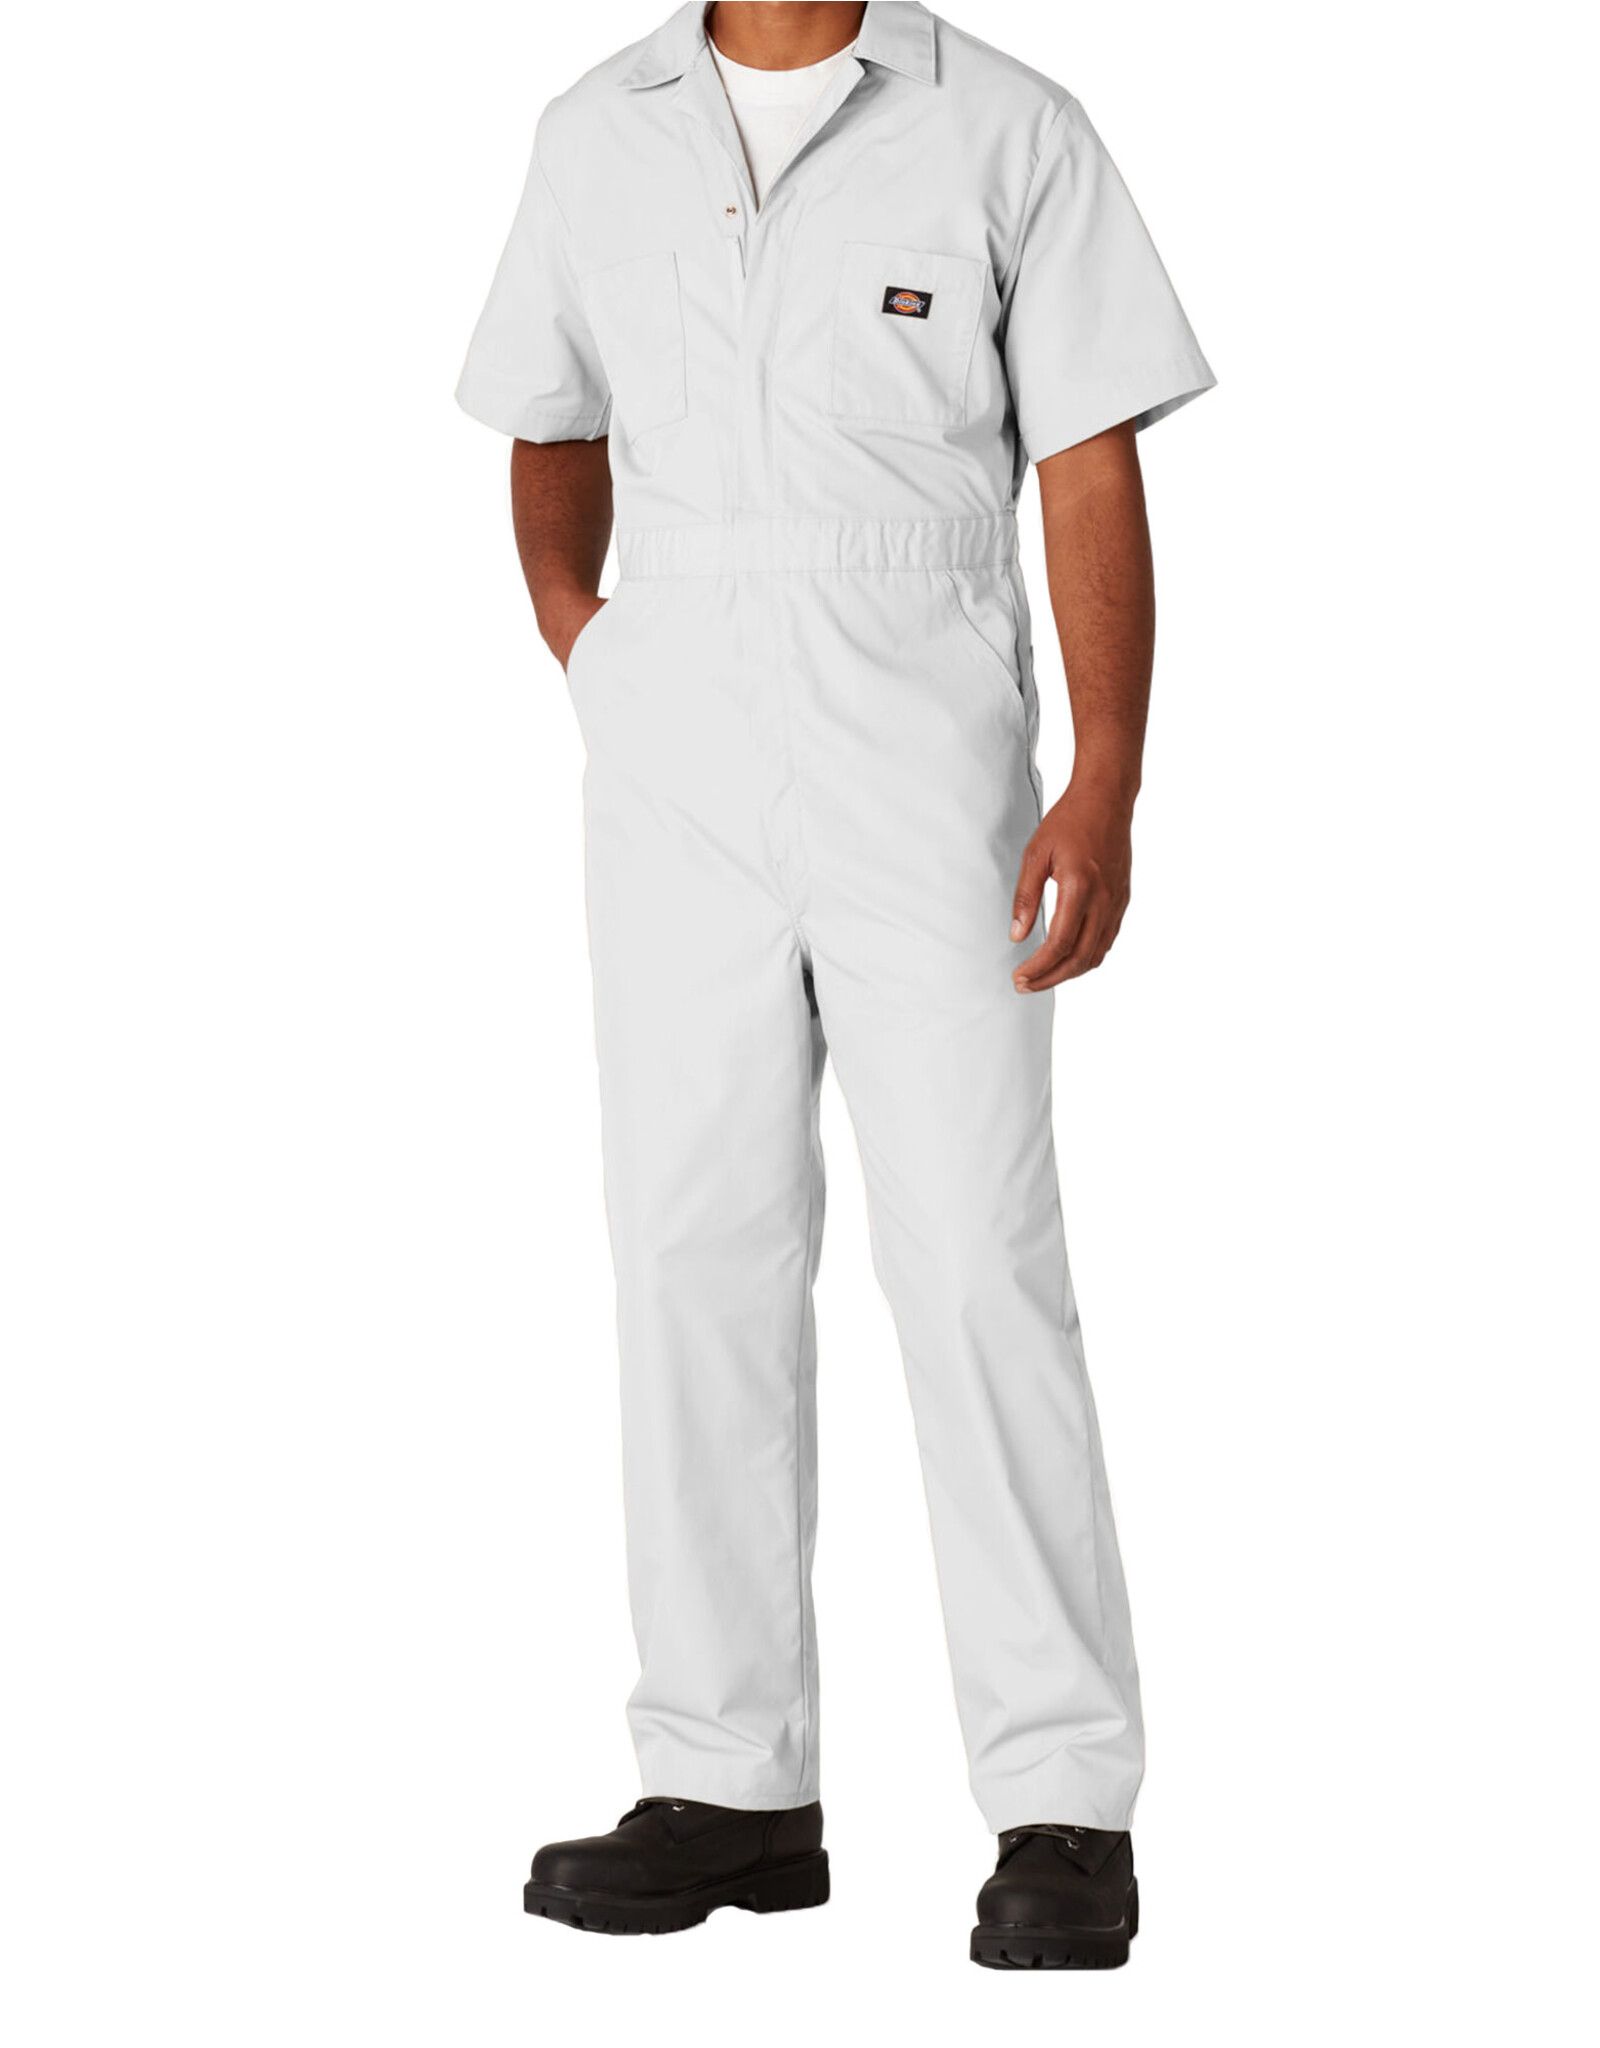 DICKIES Short Sleeve Coveralls White - 33999WH